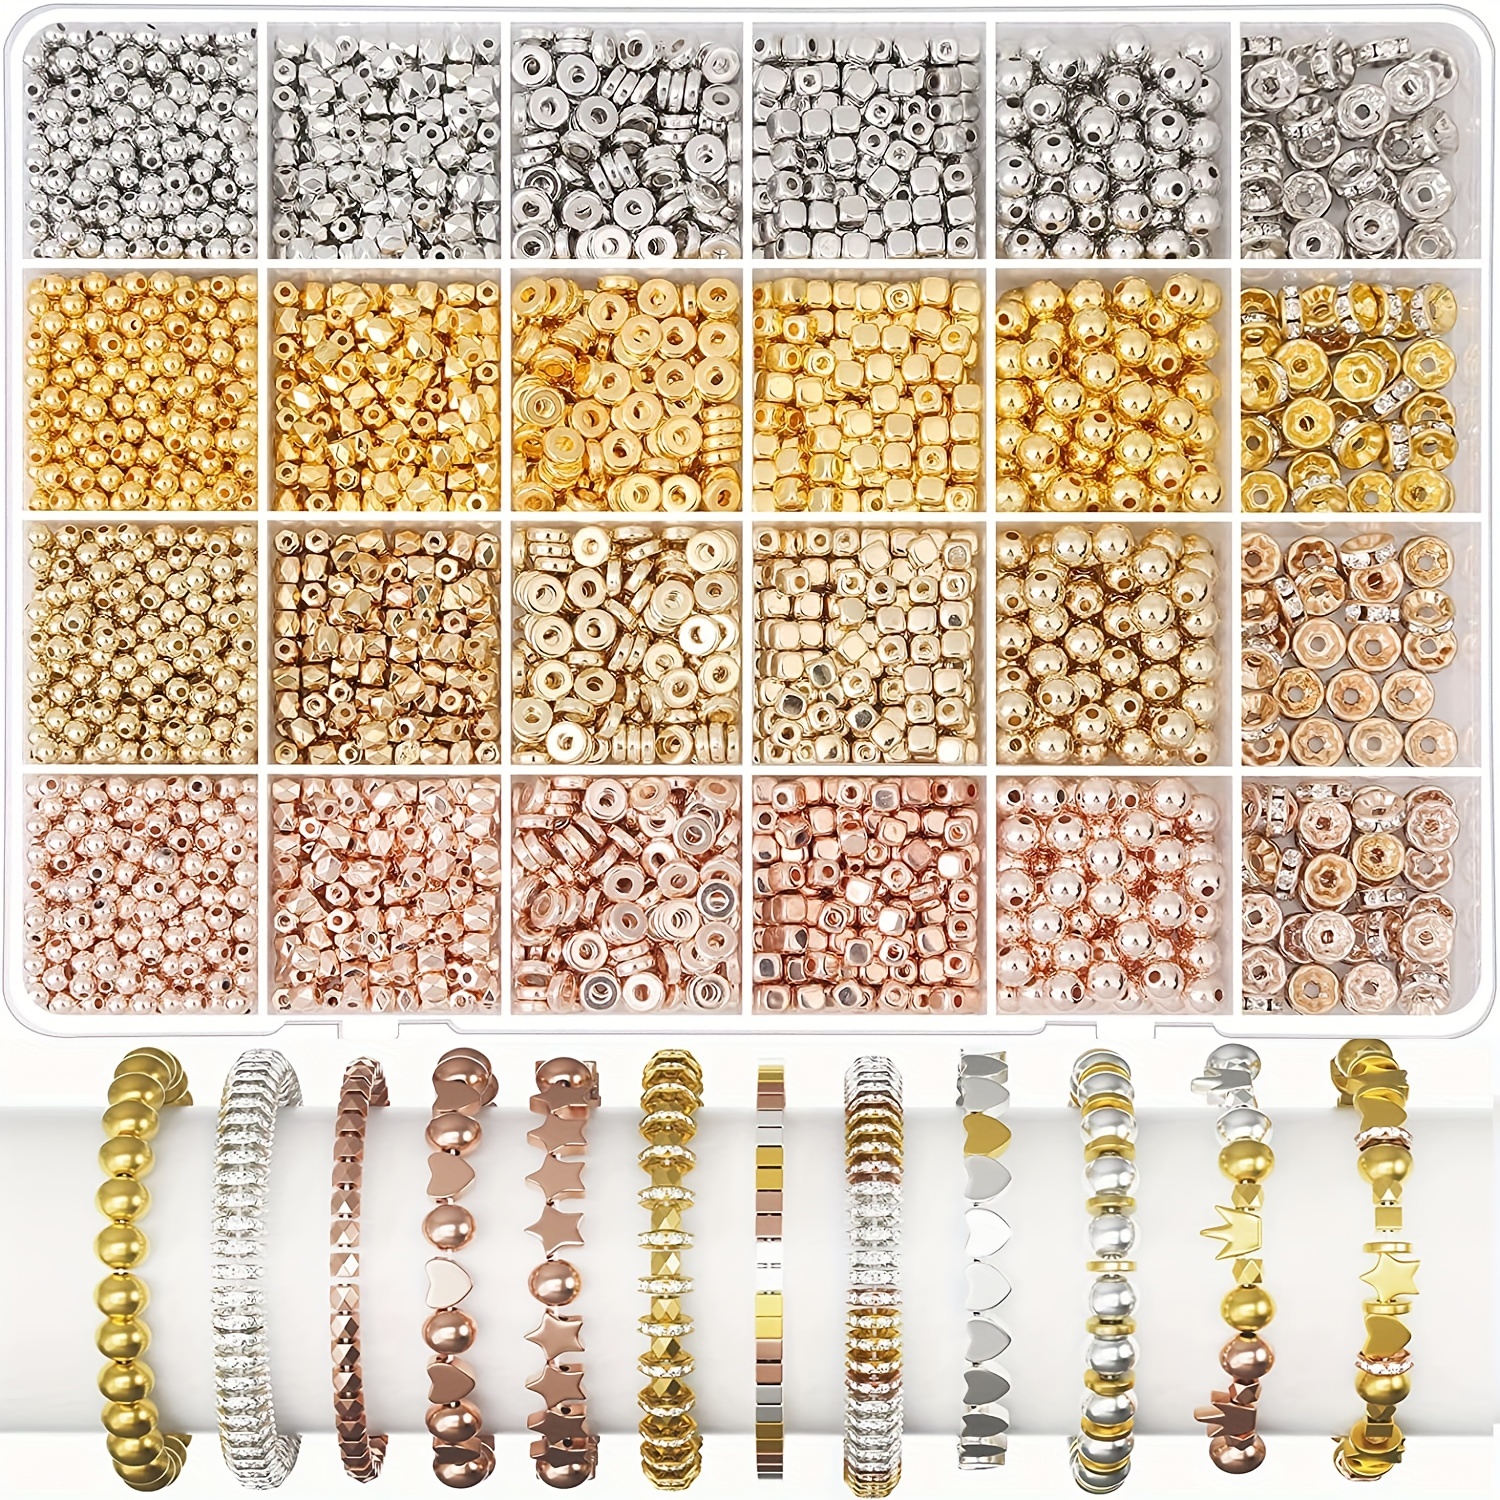 

3820pcs Spacer Beads For Jewelry Making In 6 Styles, Round Beads Flat Beads Cube Beads Bracelet Rhinestone Spacers Beads For Diy Crafting (golden, Silvery, Rose Golden, Kc Golden)